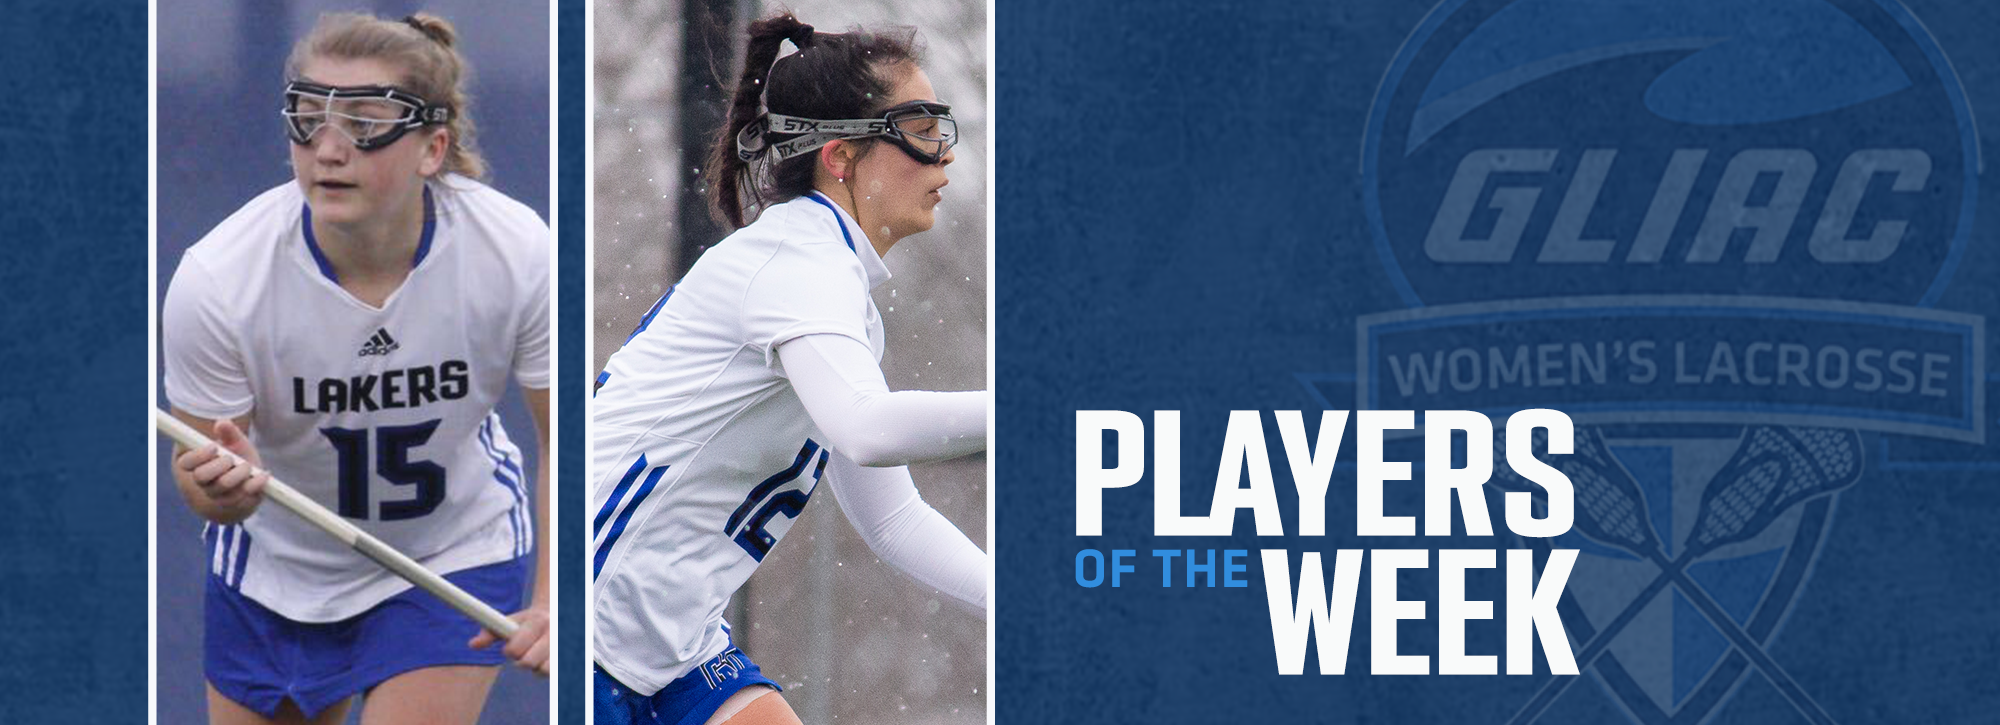 GVSU's Bursinger and Leinen honored with women's lacrosse weekly awards